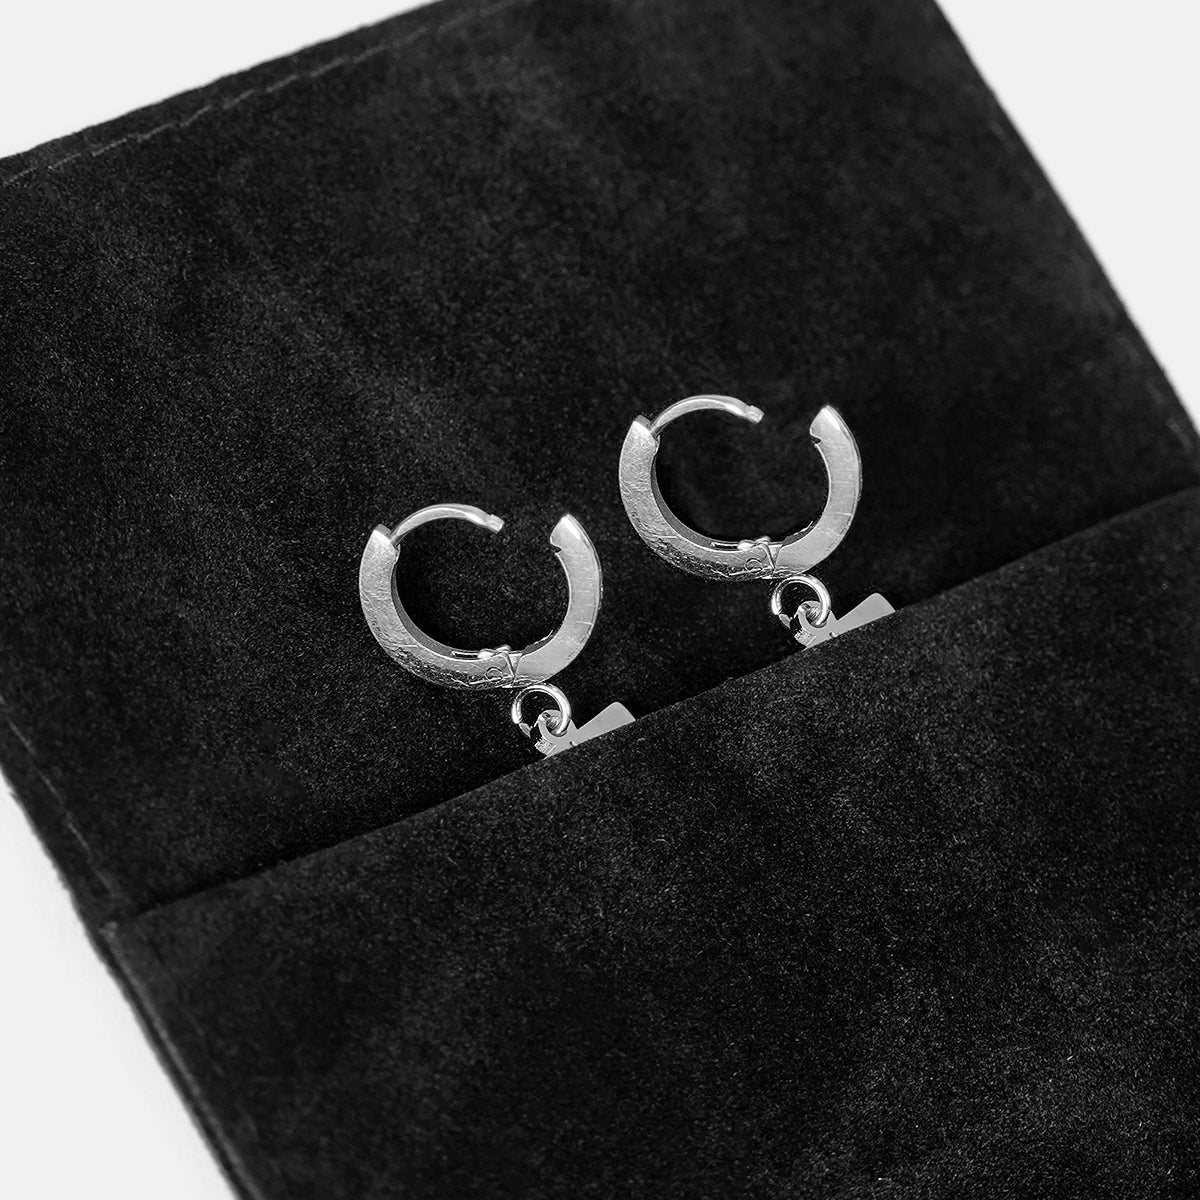 73 Number Earring - Stainless Steel